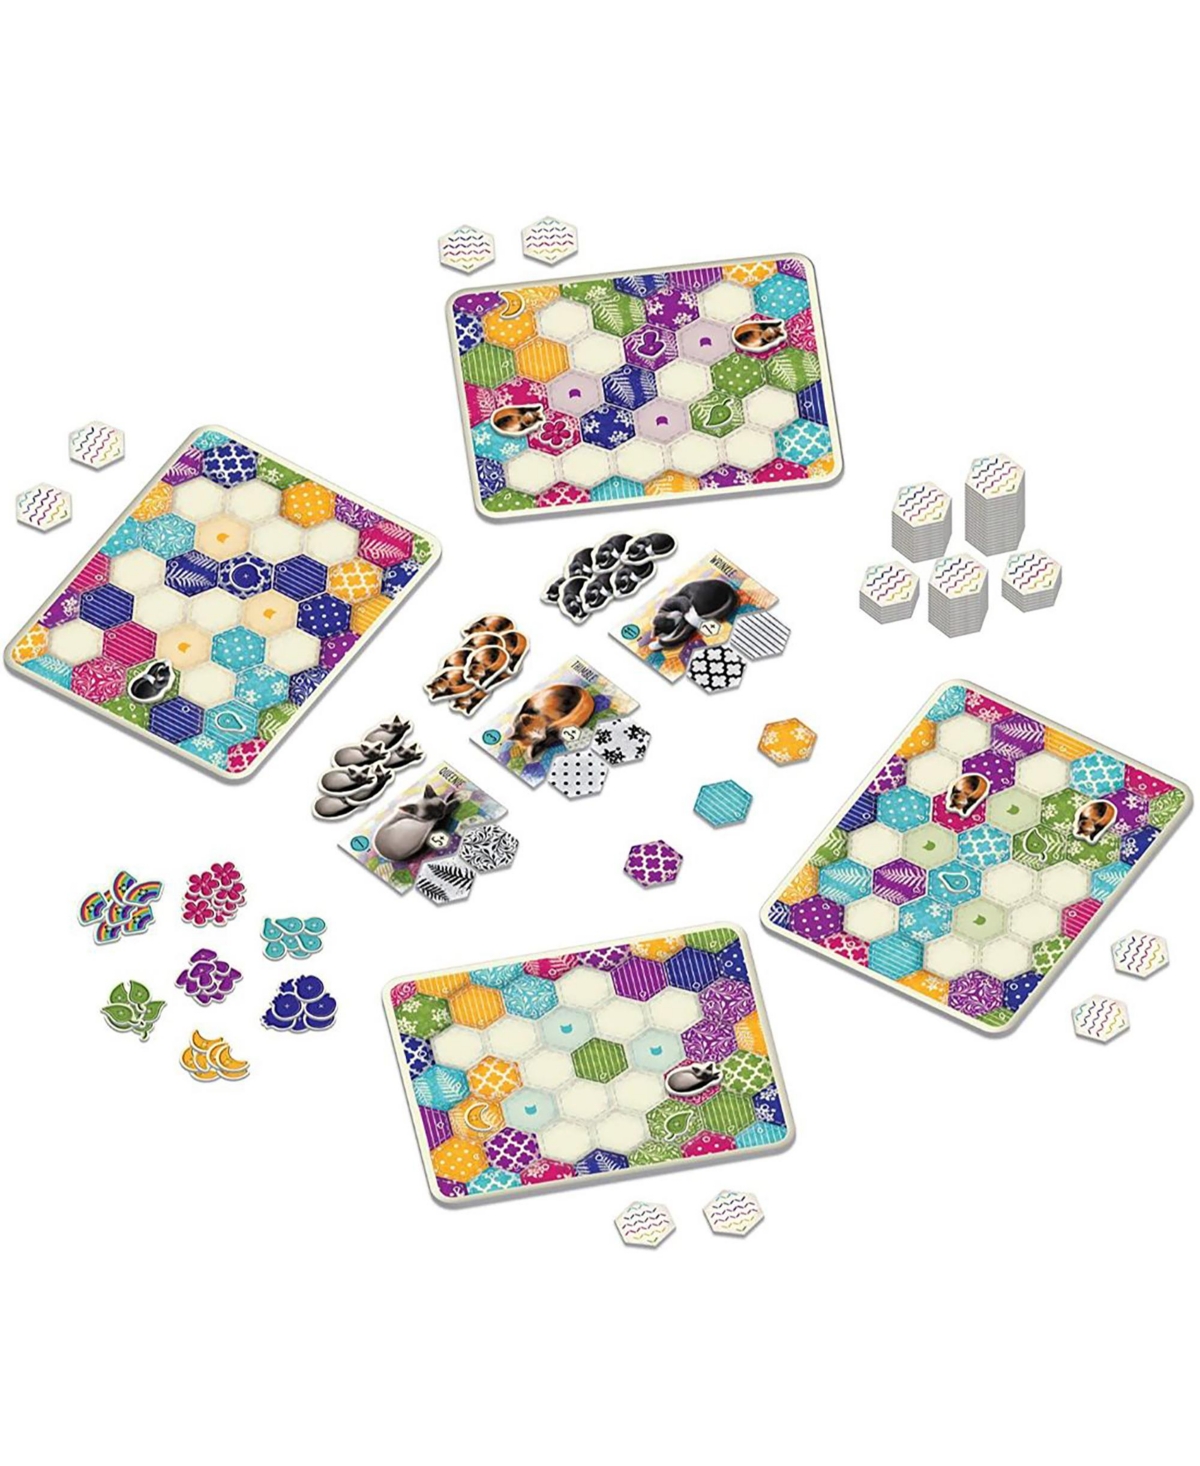 Shop Alderac Entertainment Group Aeg Calico Pattern Tile Laying Board Game In Multi